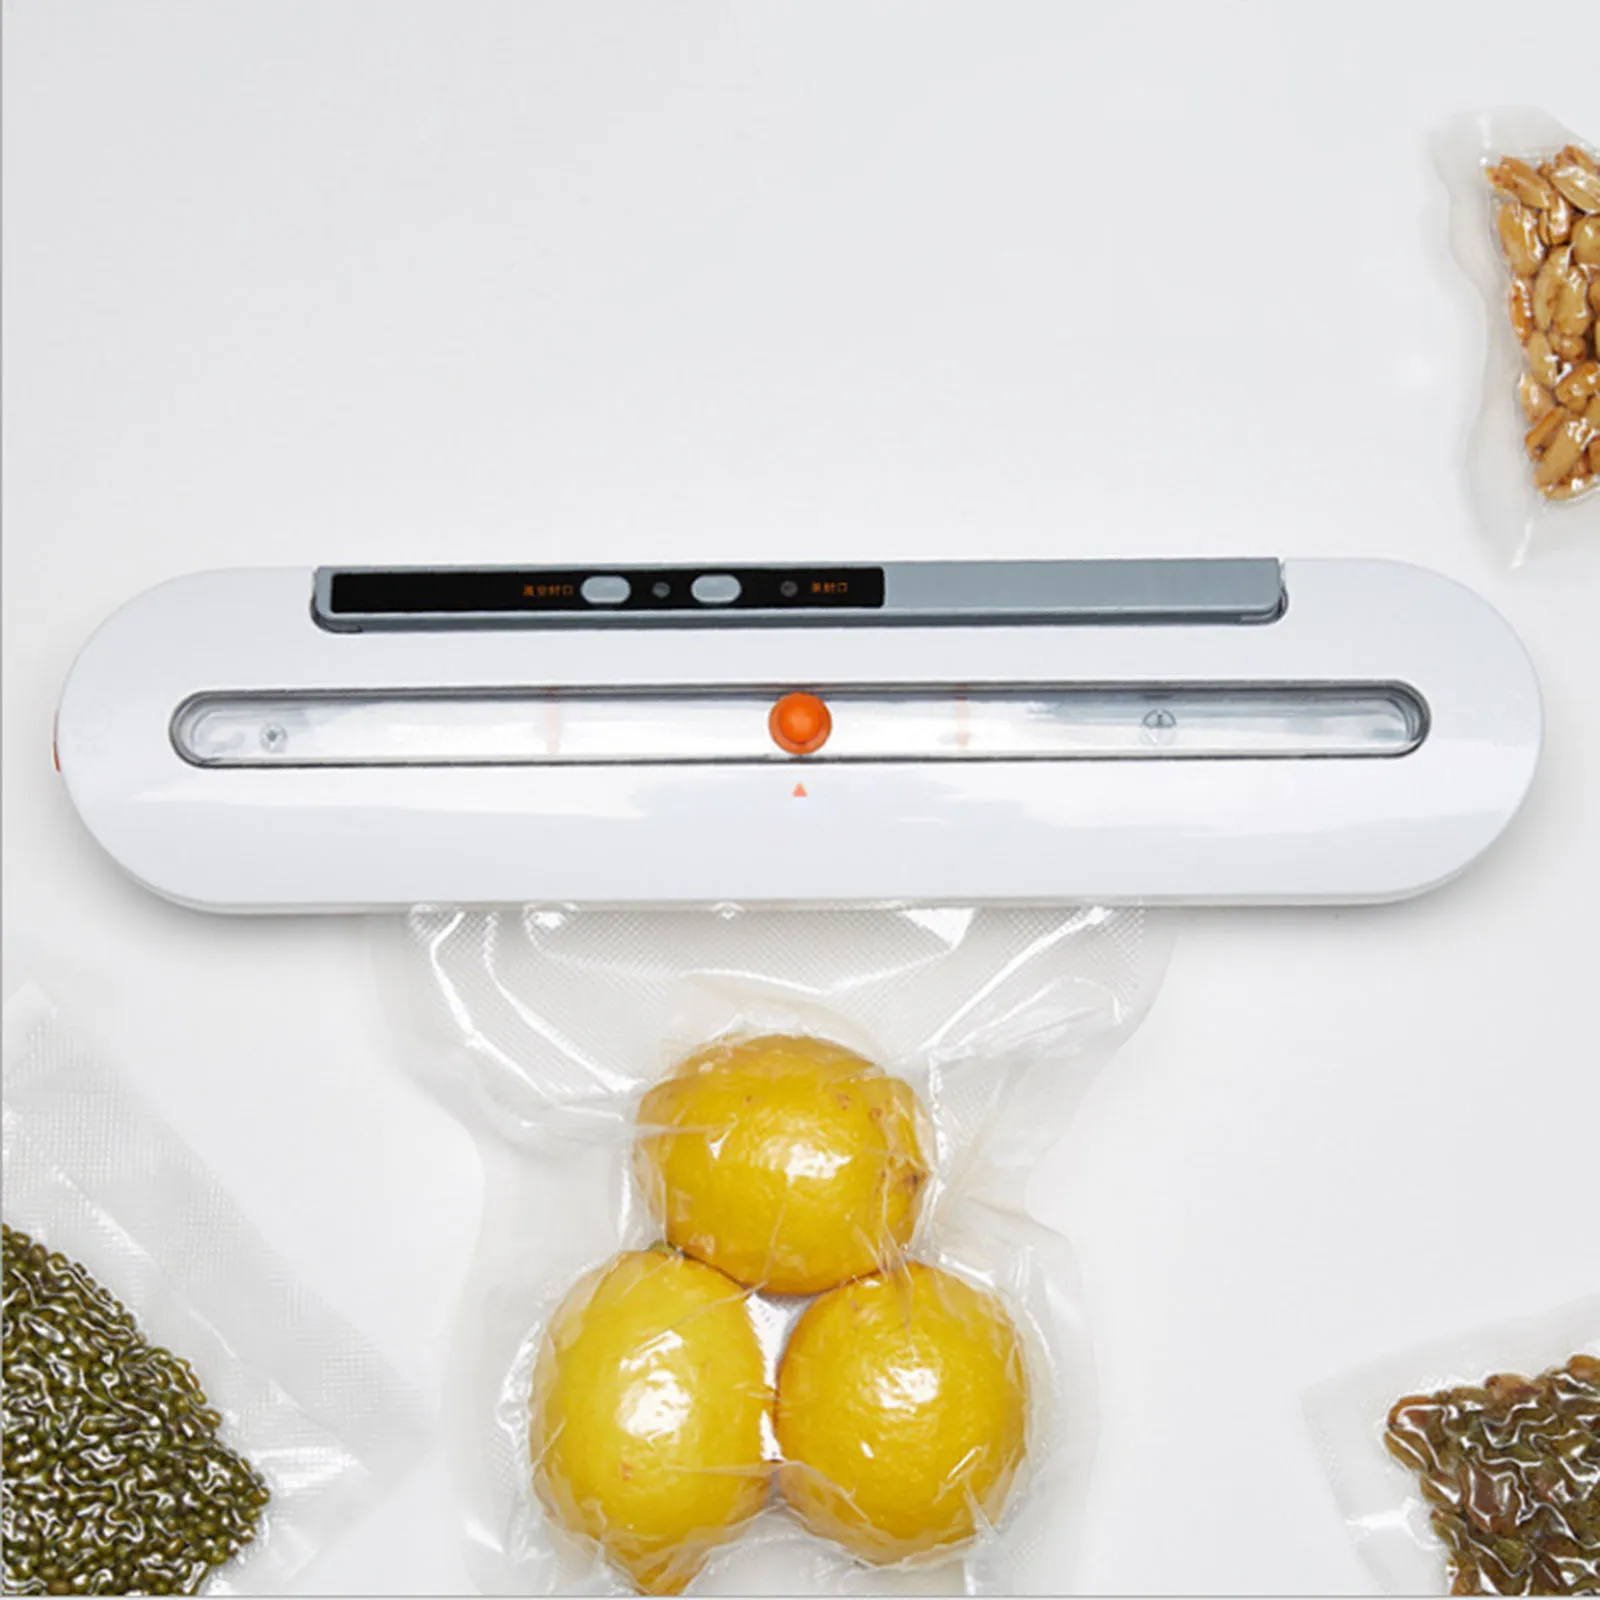 AU Plug Automatic Vacuum Sealer Machine Food Packaging for Vegetables,Meat,Eggs,Fruits with 10pcs Sealer Bags